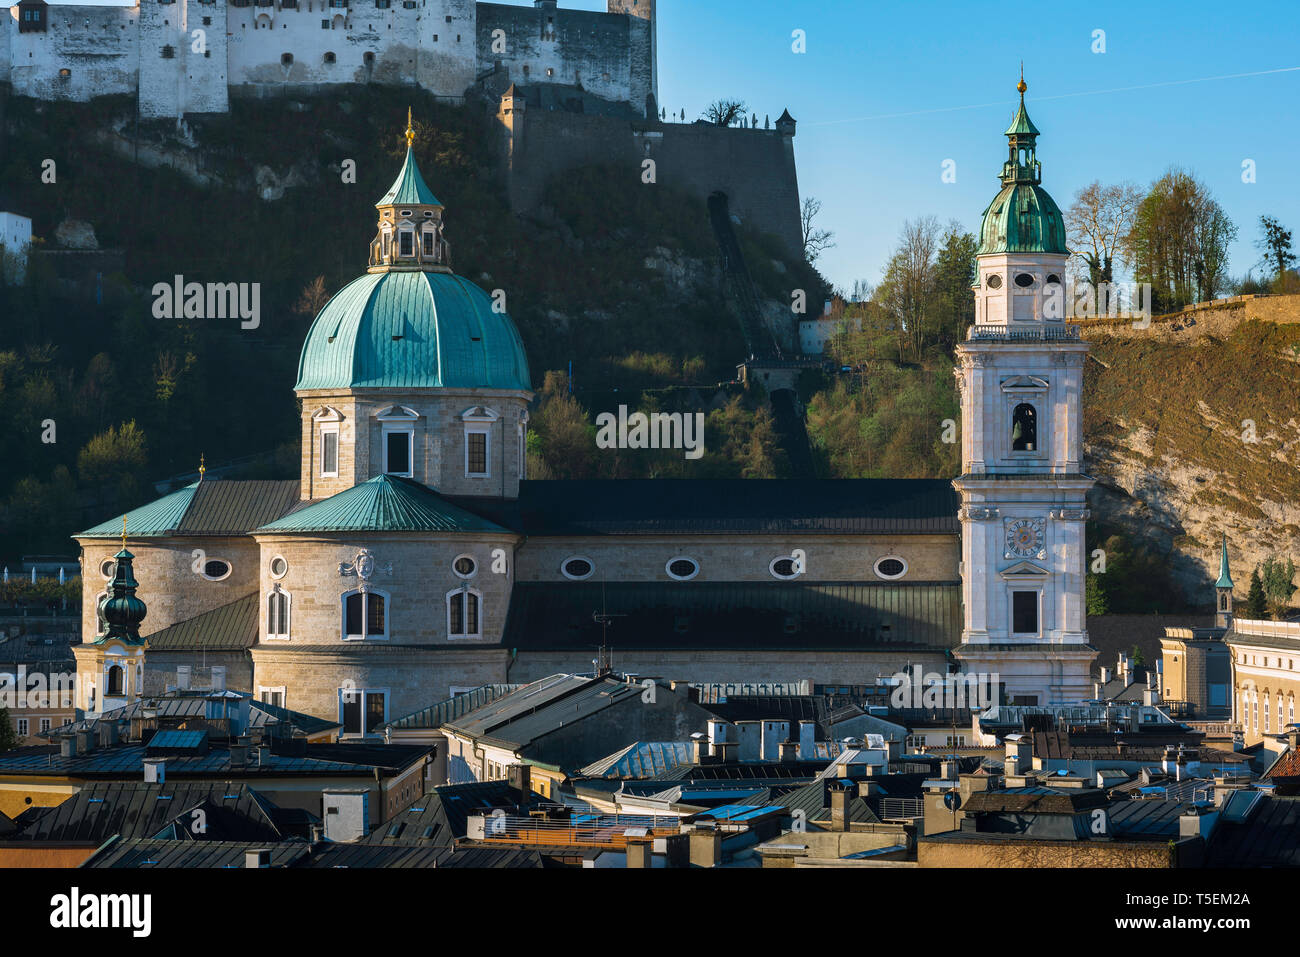 Salzburg Cathedral, full-length view of the Dom - the cathedral church of St Rupert & St Virgil - sited in the Old Town quarter of Salzburg, Austria. Stock Photo